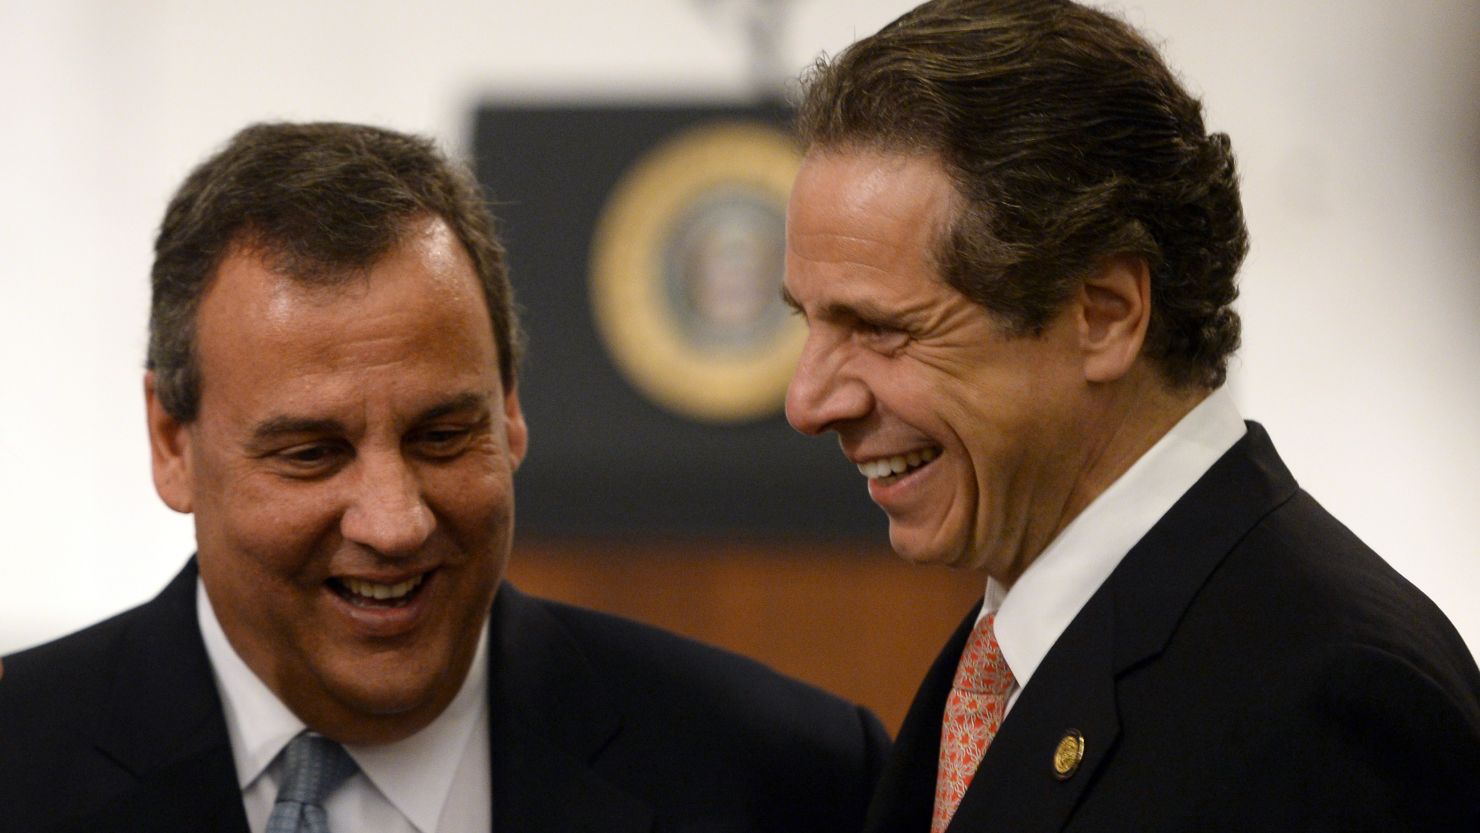 N.J. Gov. Chris Christie, left, and N.Y. Gov. Andrew Cuomo attend the dedication of the September 11th Memorial Museum.